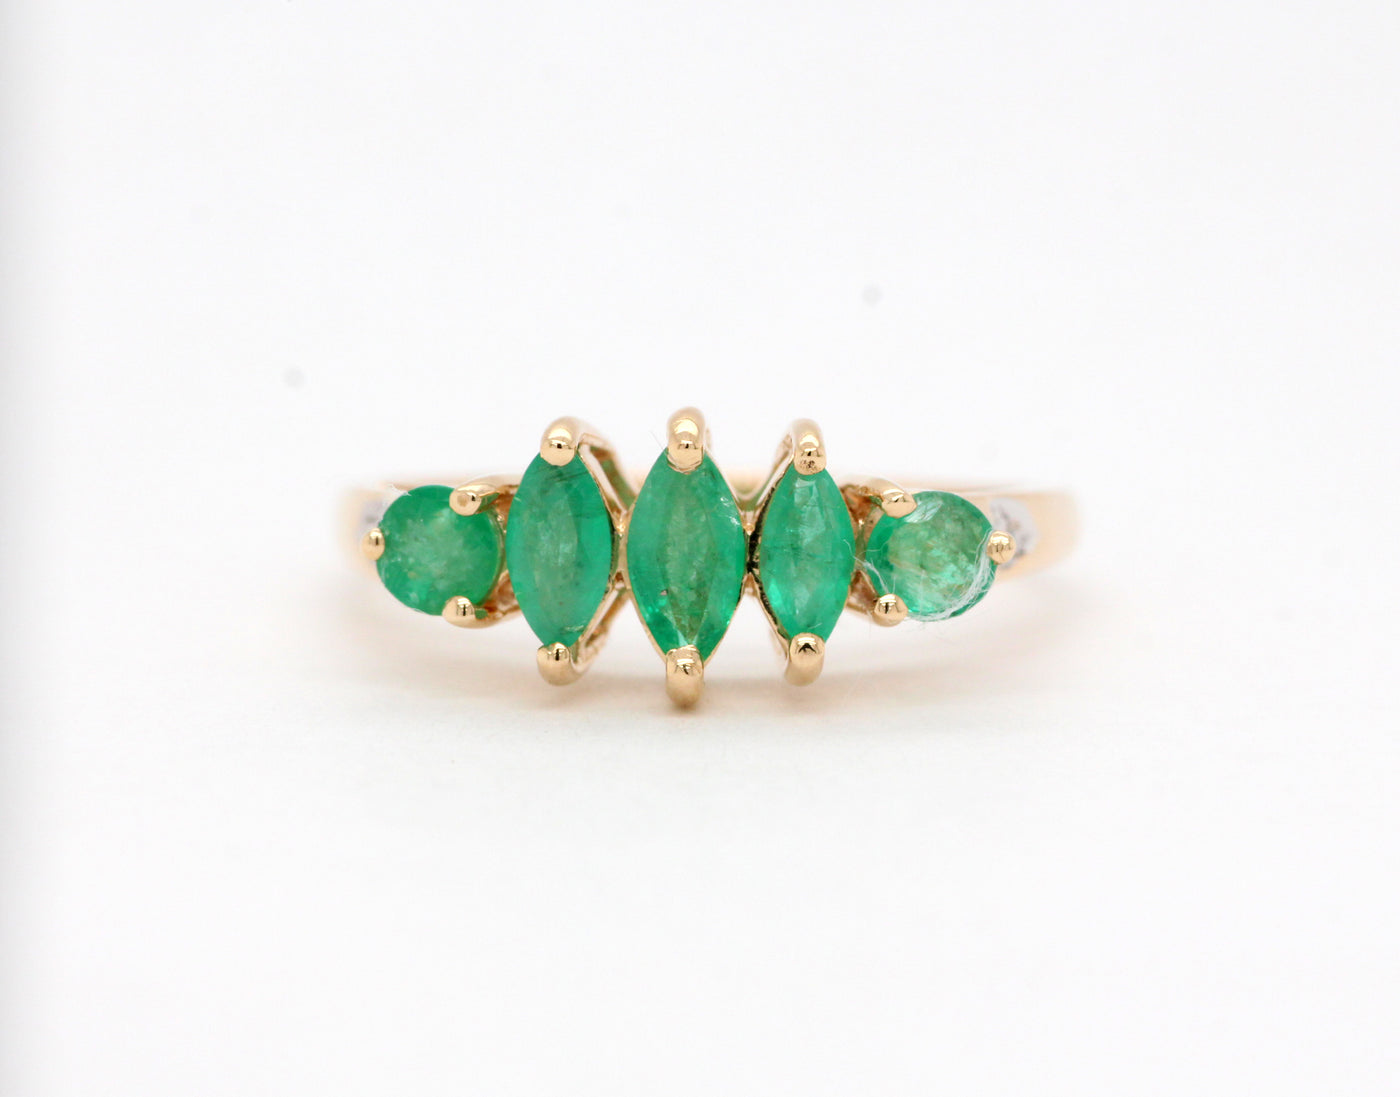 Estate 14KY .51 Cttw Emerald and Diamond Ring